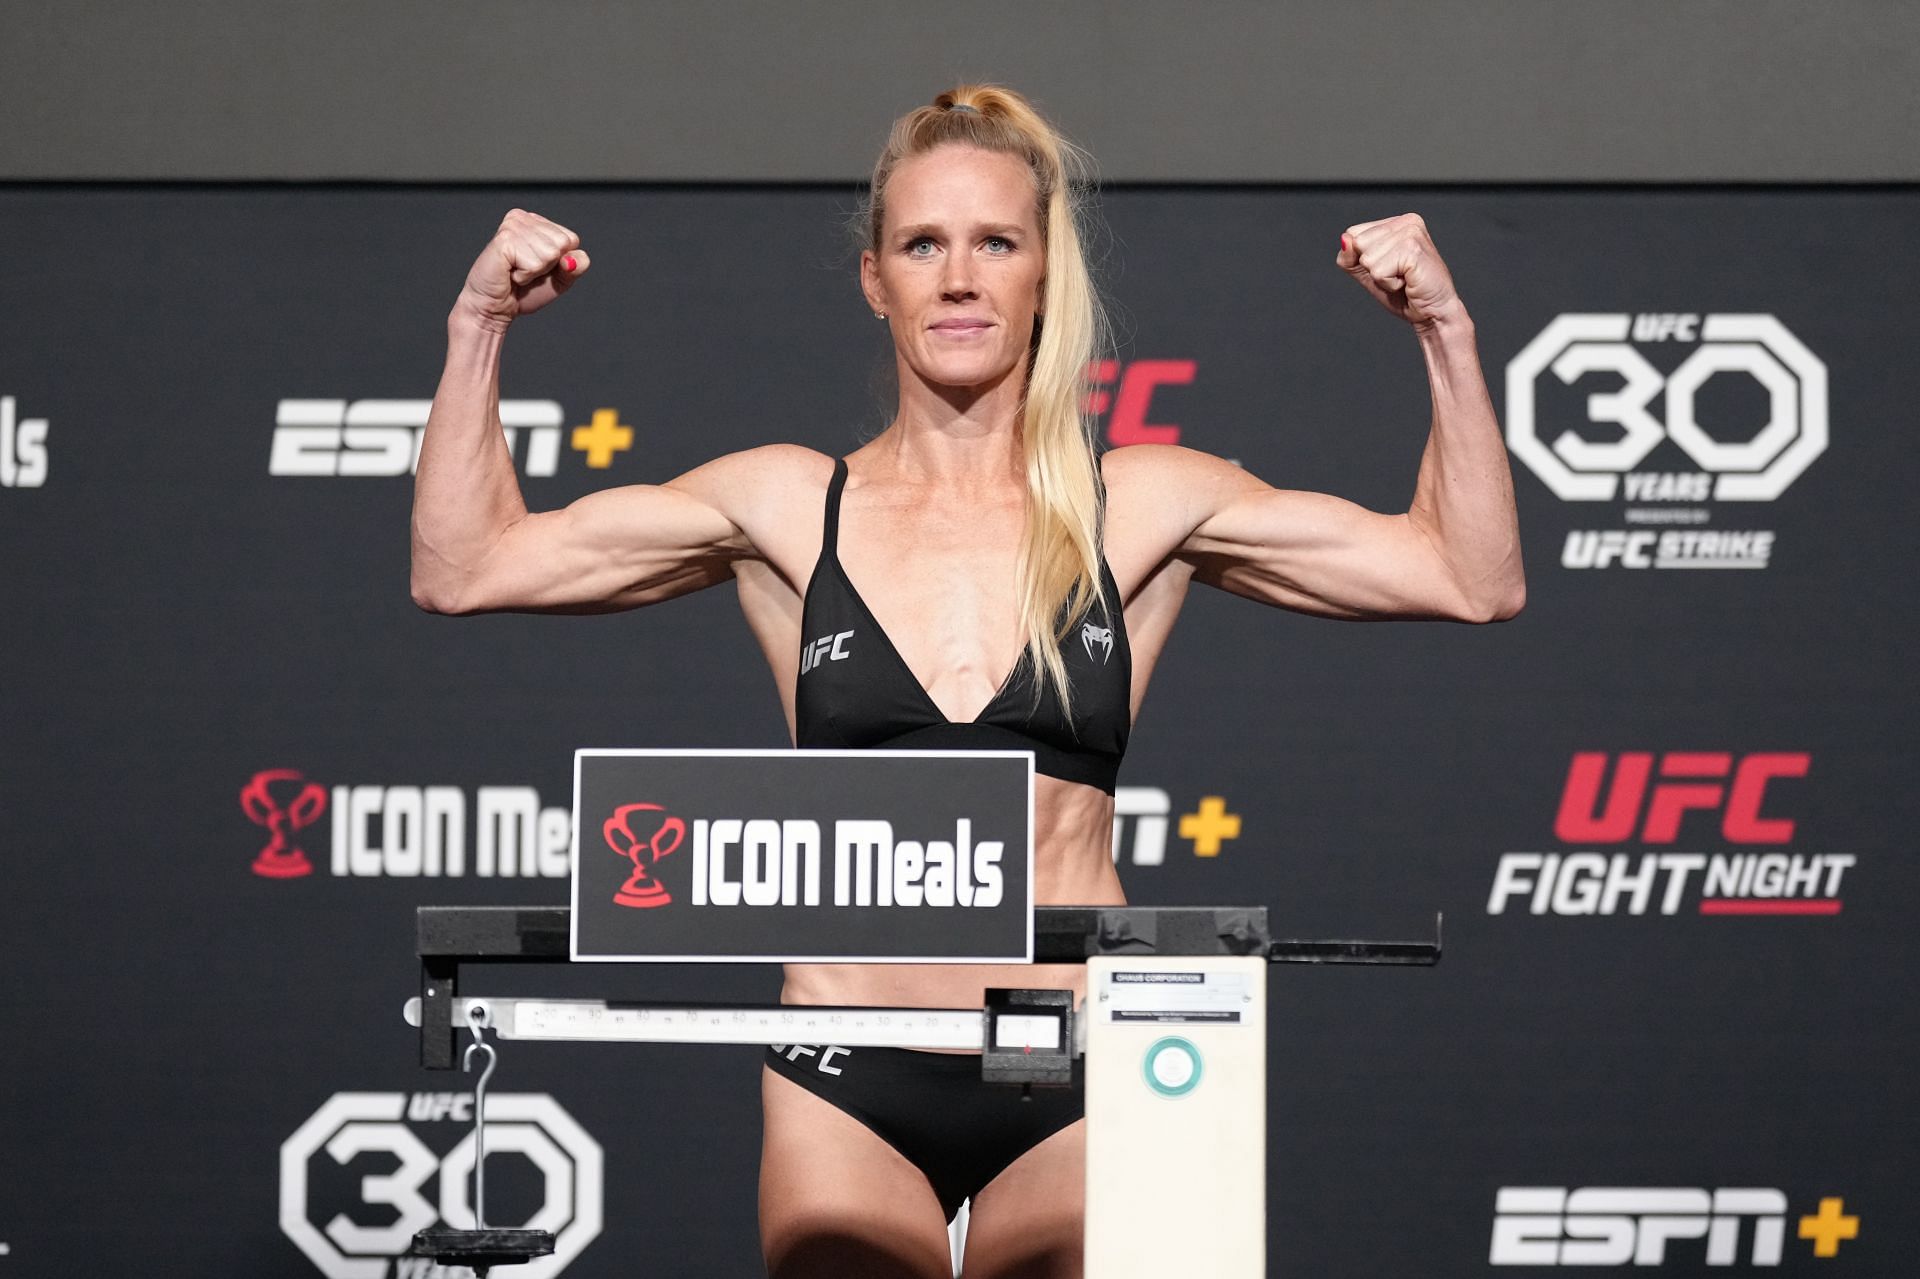 UFC Fight Night: Holm v Bueno Silva Weigh-in